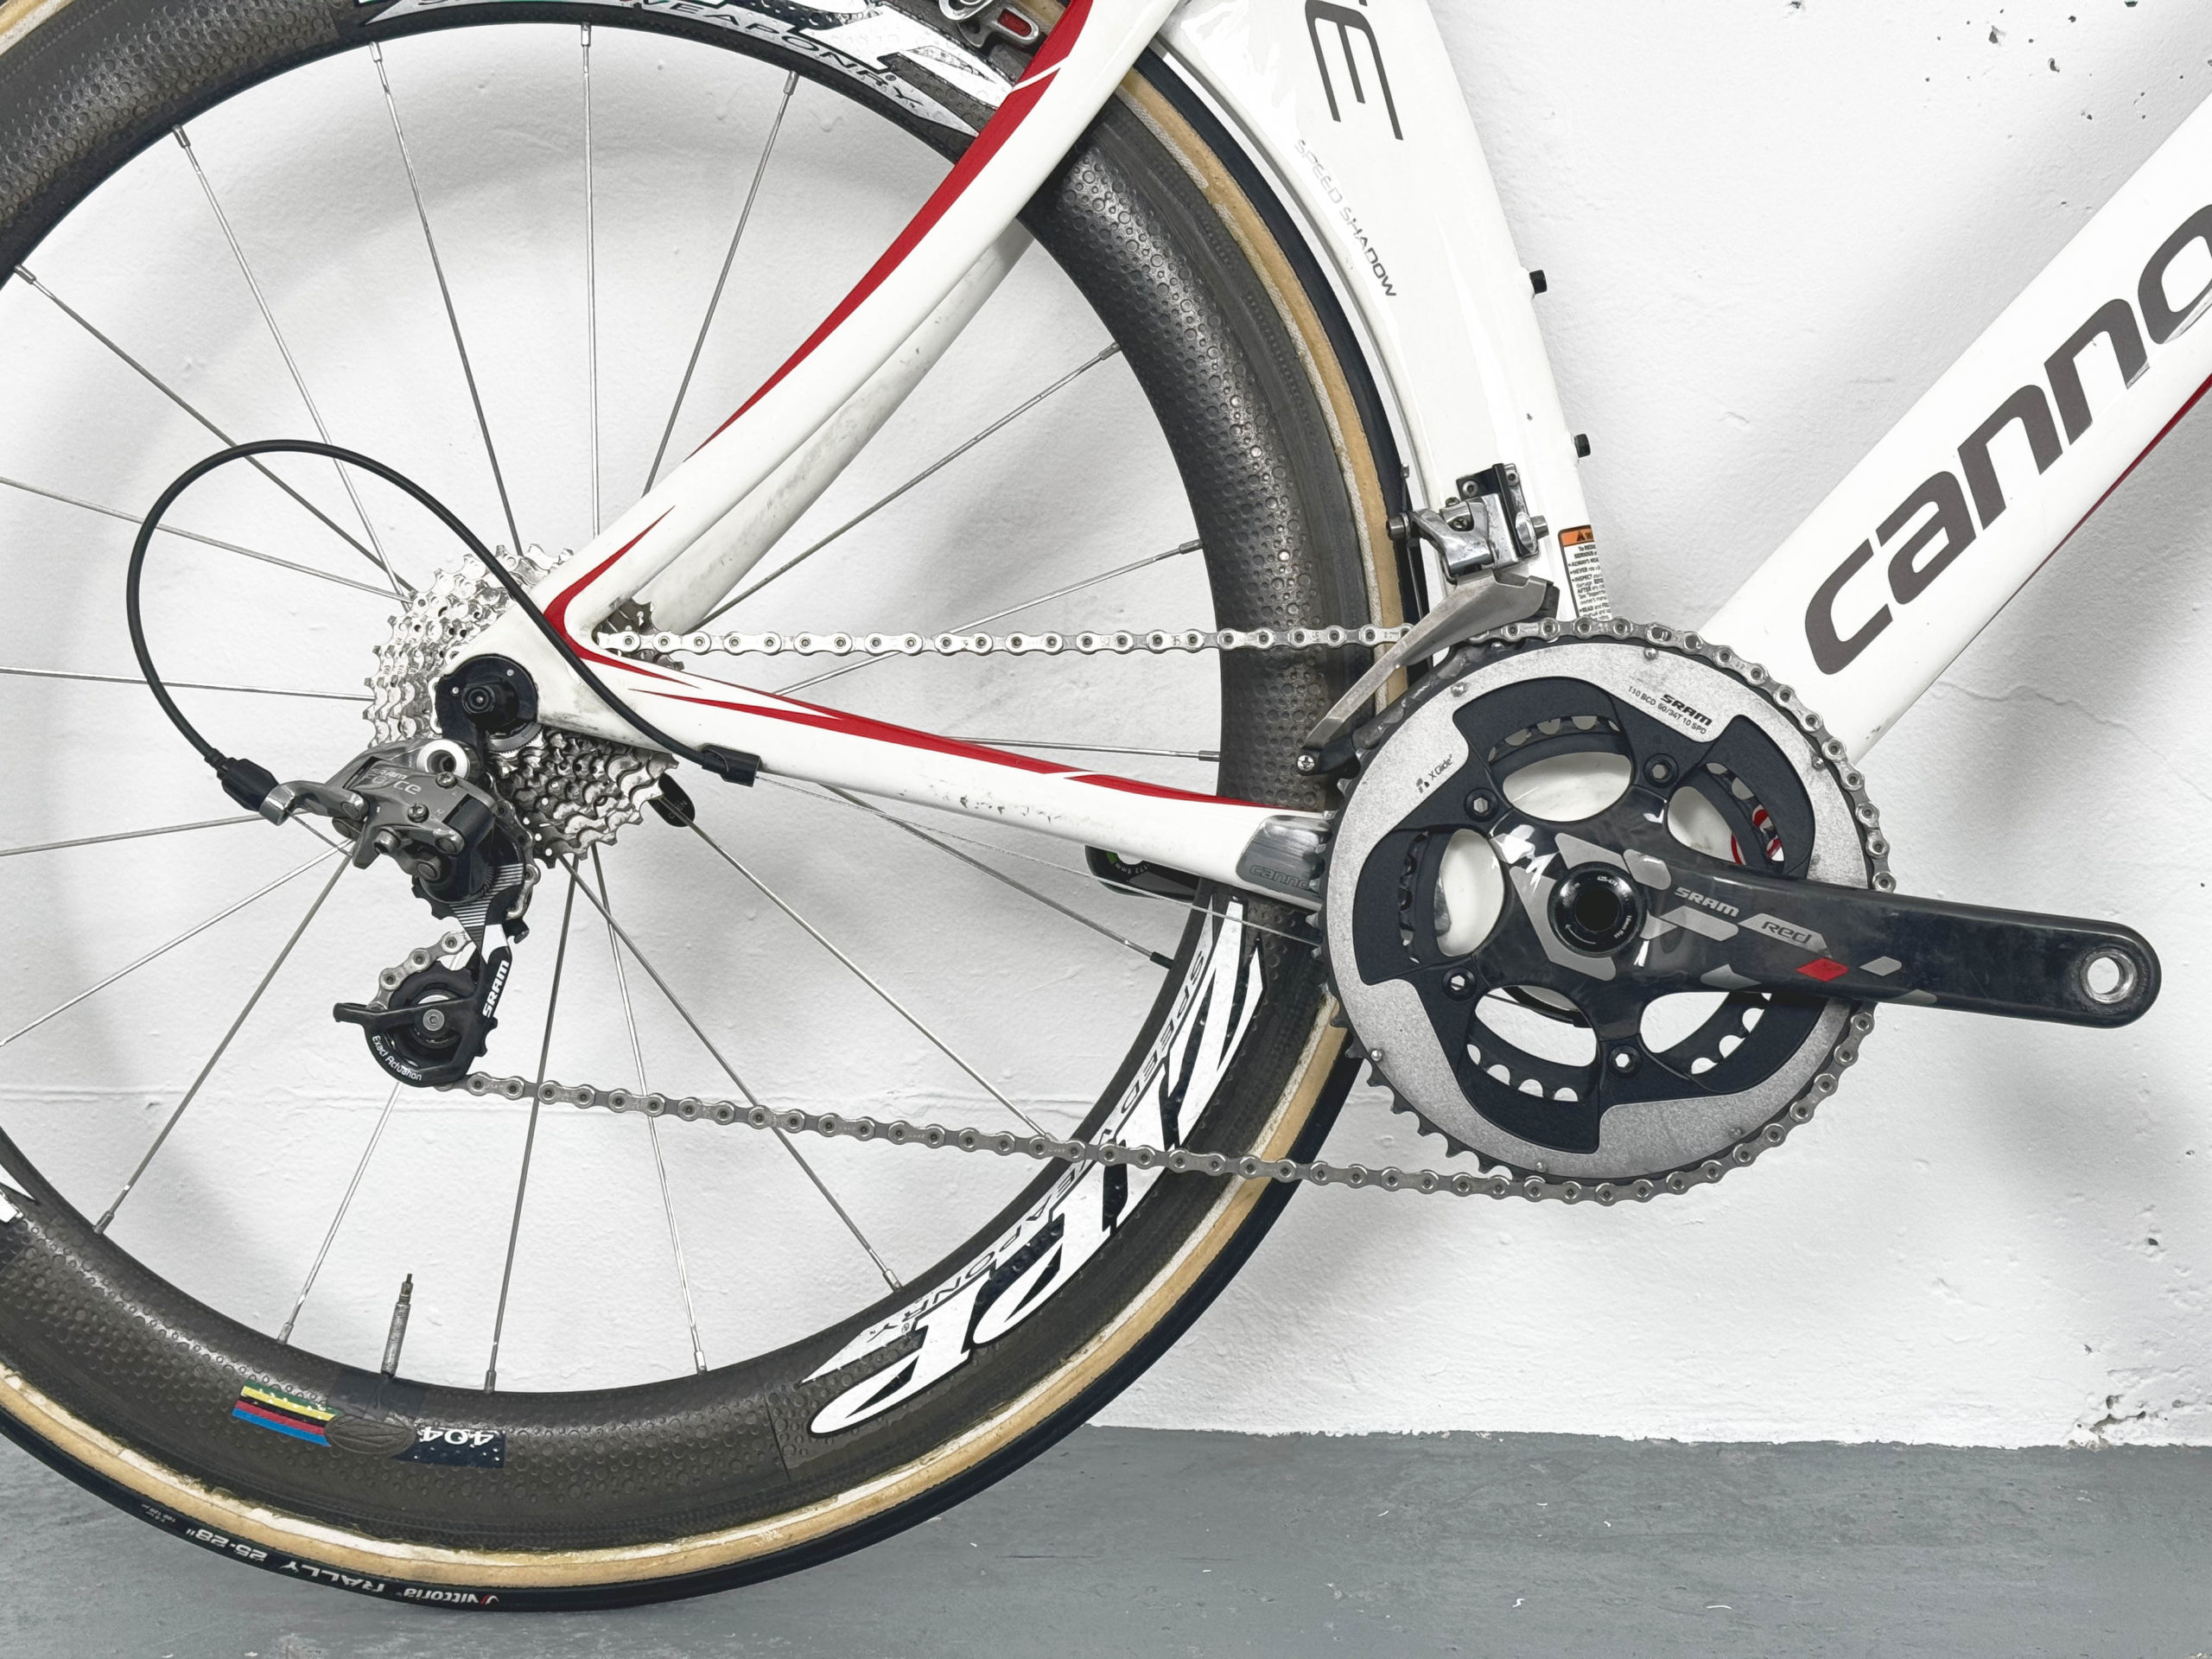 Vélo de route Cannondale Slice Sram Red-Force/ Roues Zipp 404 Firecrest Tubular Red / White